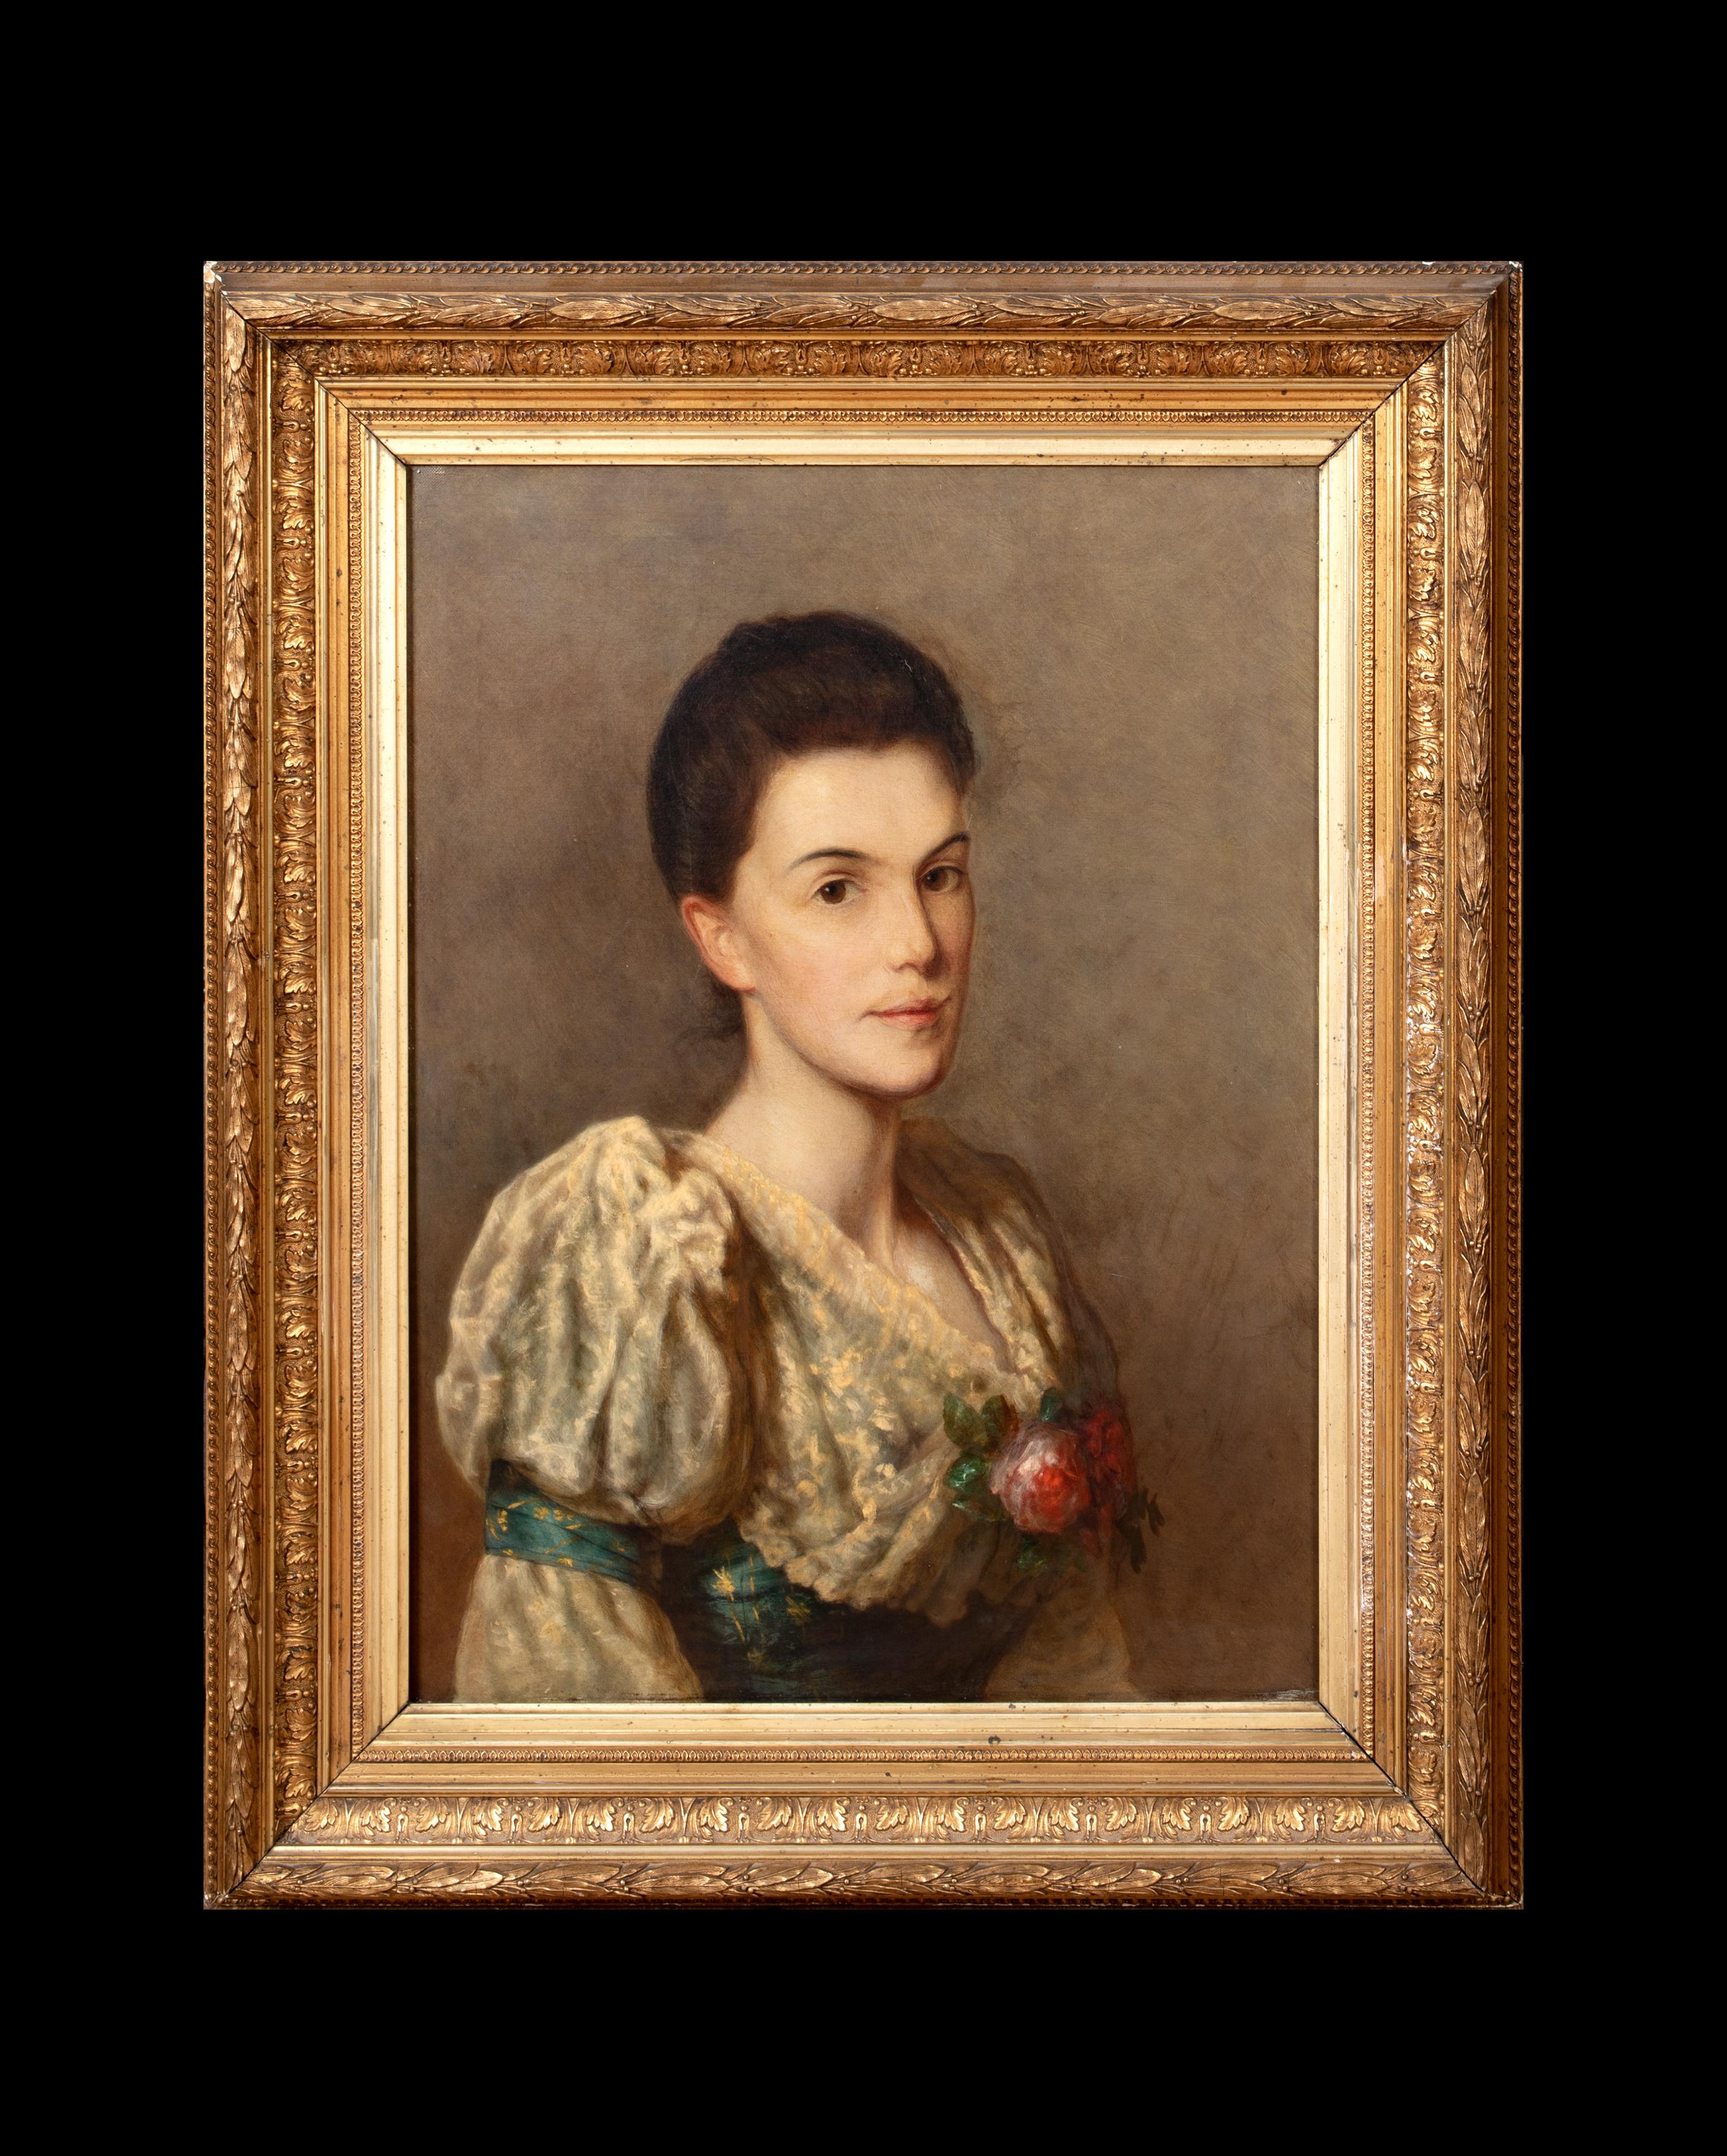 PORTRAIT Of ADELAIDE GRAGG (NEE GILLIAT) OF LONDON HOUSE THREEKINGHAM LINCOLN - Painting by Frederic Leighton